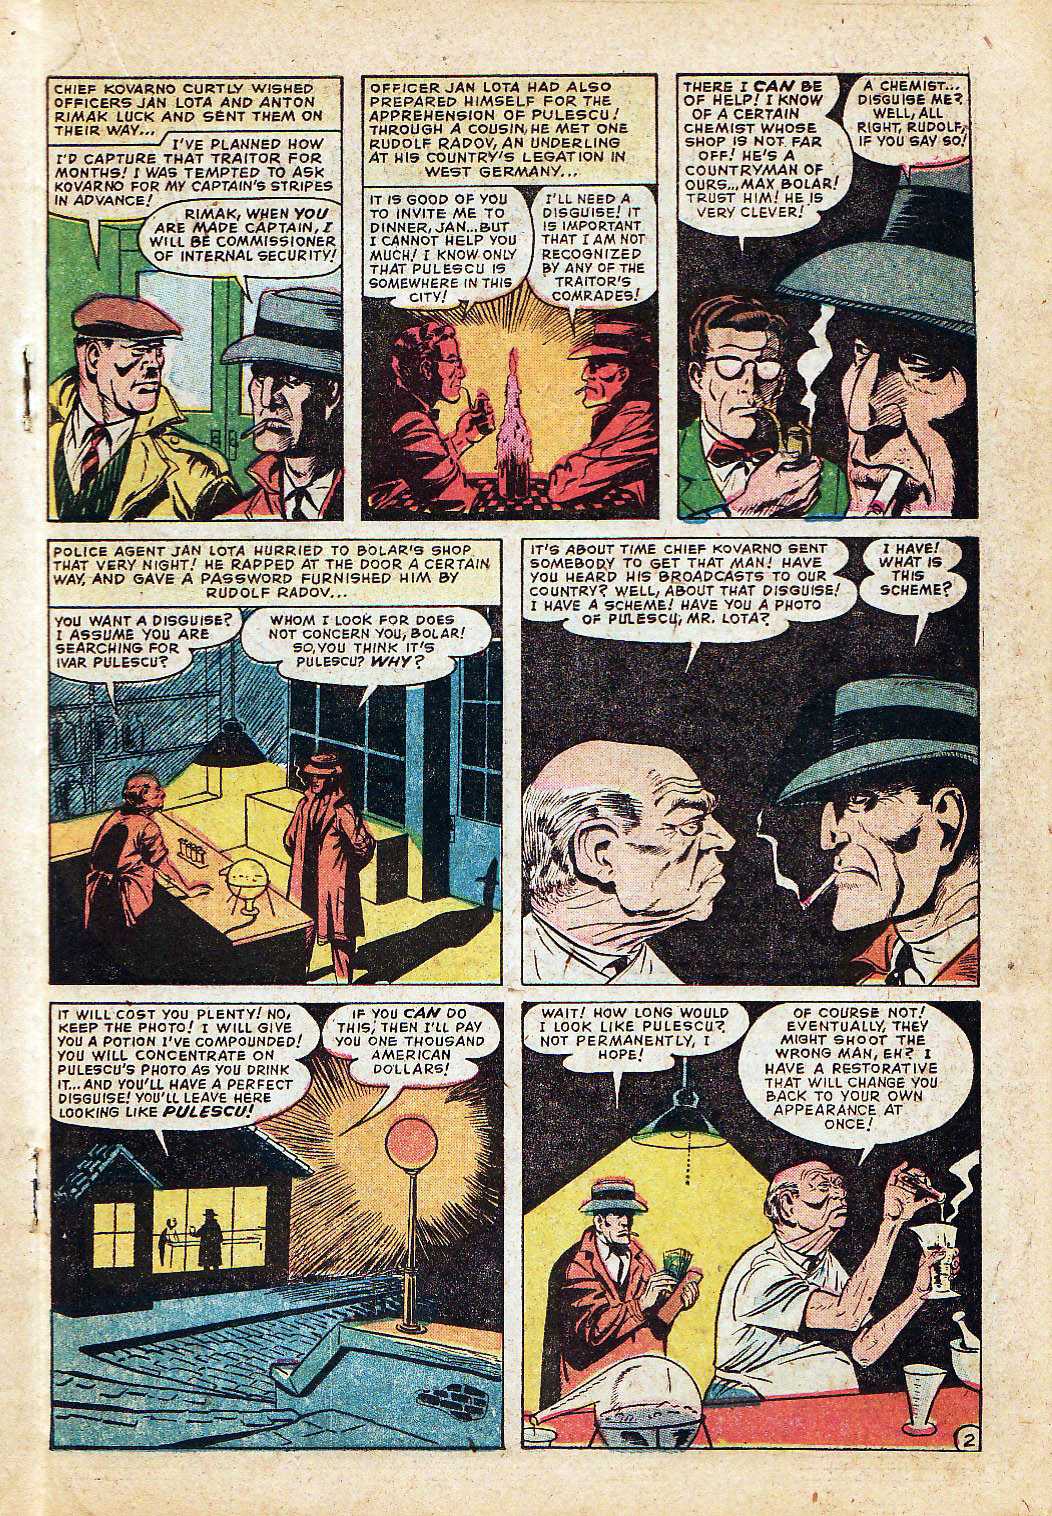 Marvel Tales (1949) 154 Page 18